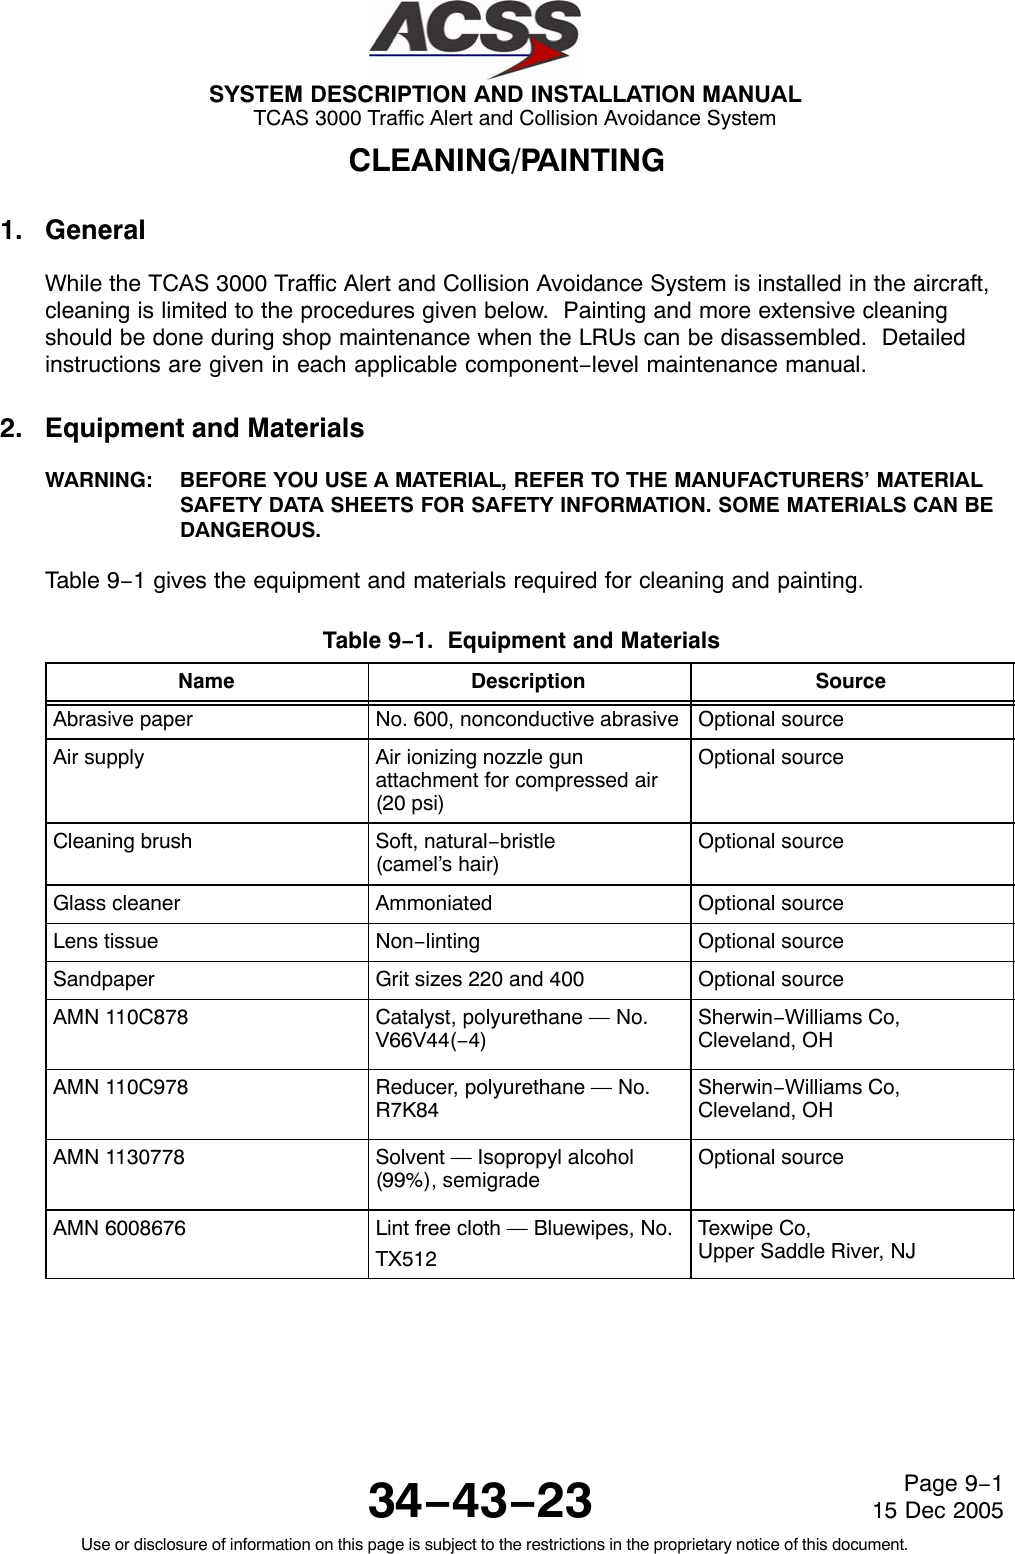 SYSTEM DESCRIPTION AND INSTALLATION MANUAL TCAS 3000 Traffic Alert and Collision Avoidance System34−43−23Use or disclosure of information on this page is subject to the restrictions in the proprietary notice of this document.Page 9−115 Dec 2005CLEANING/PAINTING1. GeneralWhile the TCAS 3000 Traffic Alert and Collision Avoidance System is installed in the aircraft,cleaning is limited to the procedures given below.  Painting and more extensive cleaningshould be done during shop maintenance when the LRUs can be disassembled.  Detailedinstructions are given in each applicable component−level maintenance manual.2. Equipment and MaterialsWARNING: BEFORE YOU USE A MATERIAL, REFER TO THE MANUFACTURERS’ MATERIALSAFETY DATA SHEETS FOR SAFETY INFORMATION. SOME MATERIALS CAN BEDANGEROUS.Table 9−1 gives the equipment and materials required for cleaning and painting.Table 9−1.  Equipment and Materials  Name Description SourceAbrasive paper No. 600, nonconductive abrasive Optional sourceAir supply Air ionizing nozzle gunattachment for compressed air(20 psi)Optional sourceCleaning brush Soft, natural−bristle(camel’s hair)Optional sourceGlass cleaner Ammoniated Optional sourceLens tissue Non−linting Optional sourceSandpaper Grit sizes 220 and 400 Optional sourceAMN 110C878 Catalyst, polyurethane — No.V66V44(−4)Sherwin−Williams Co,Cleveland, OHAMN 110C978 Reducer, polyurethane — No.R7K84Sherwin−Williams Co,Cleveland, OHAMN 1130778 Solvent — Isopropyl alcohol(99%), semigradeOptional sourceAMN 6008676 Lint free cloth — Bluewipes, No.TX512Texwipe Co,Upper Saddle River, NJ